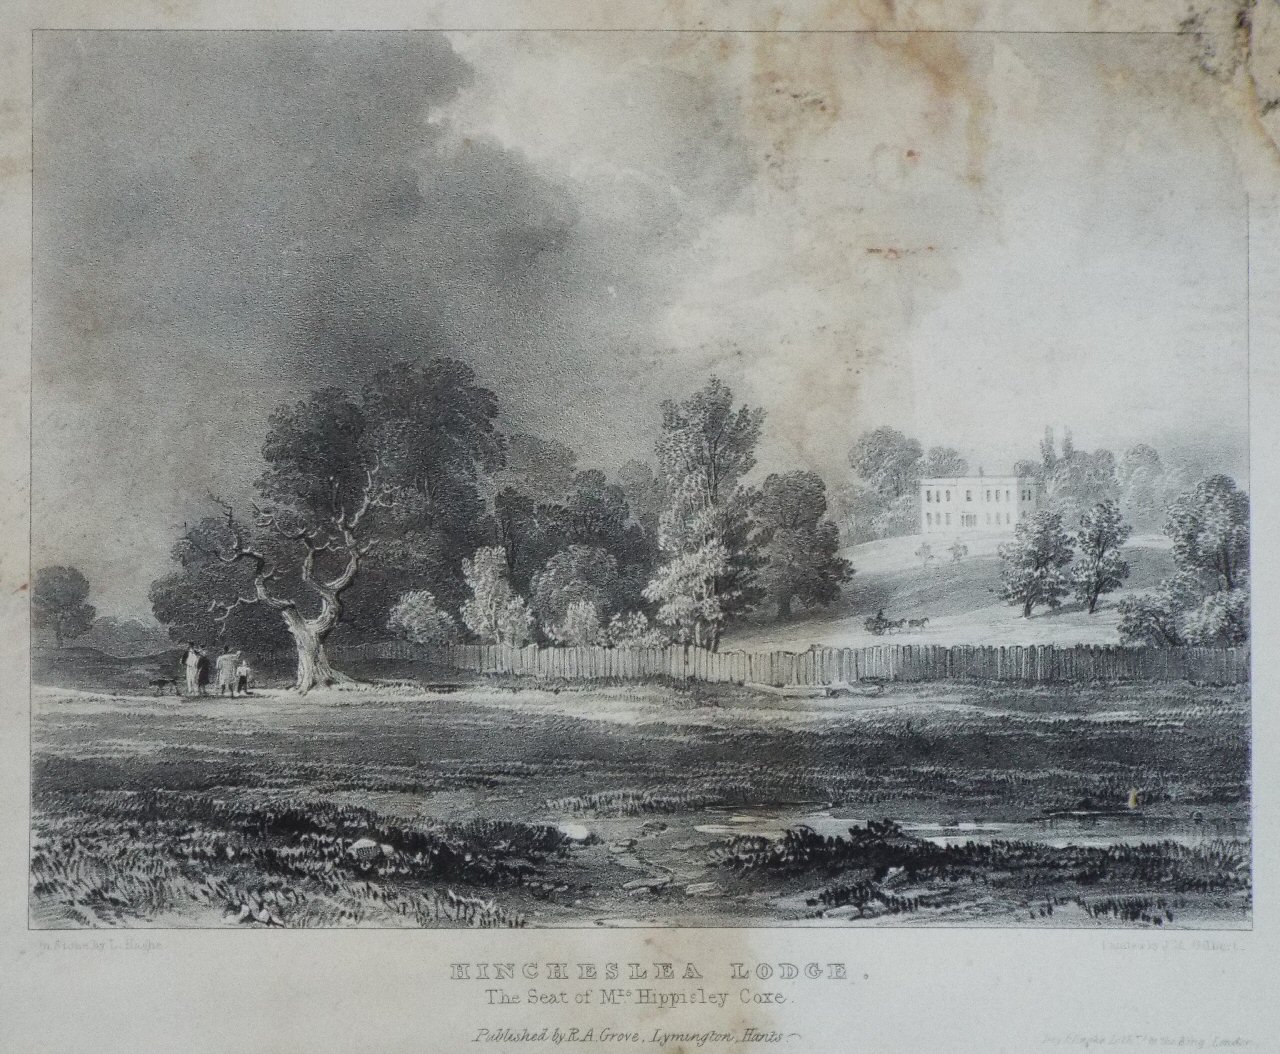 Lithograph - Hinchelsea Lodge, The Seat of Mrs Hippisley Coxe. - Haghe